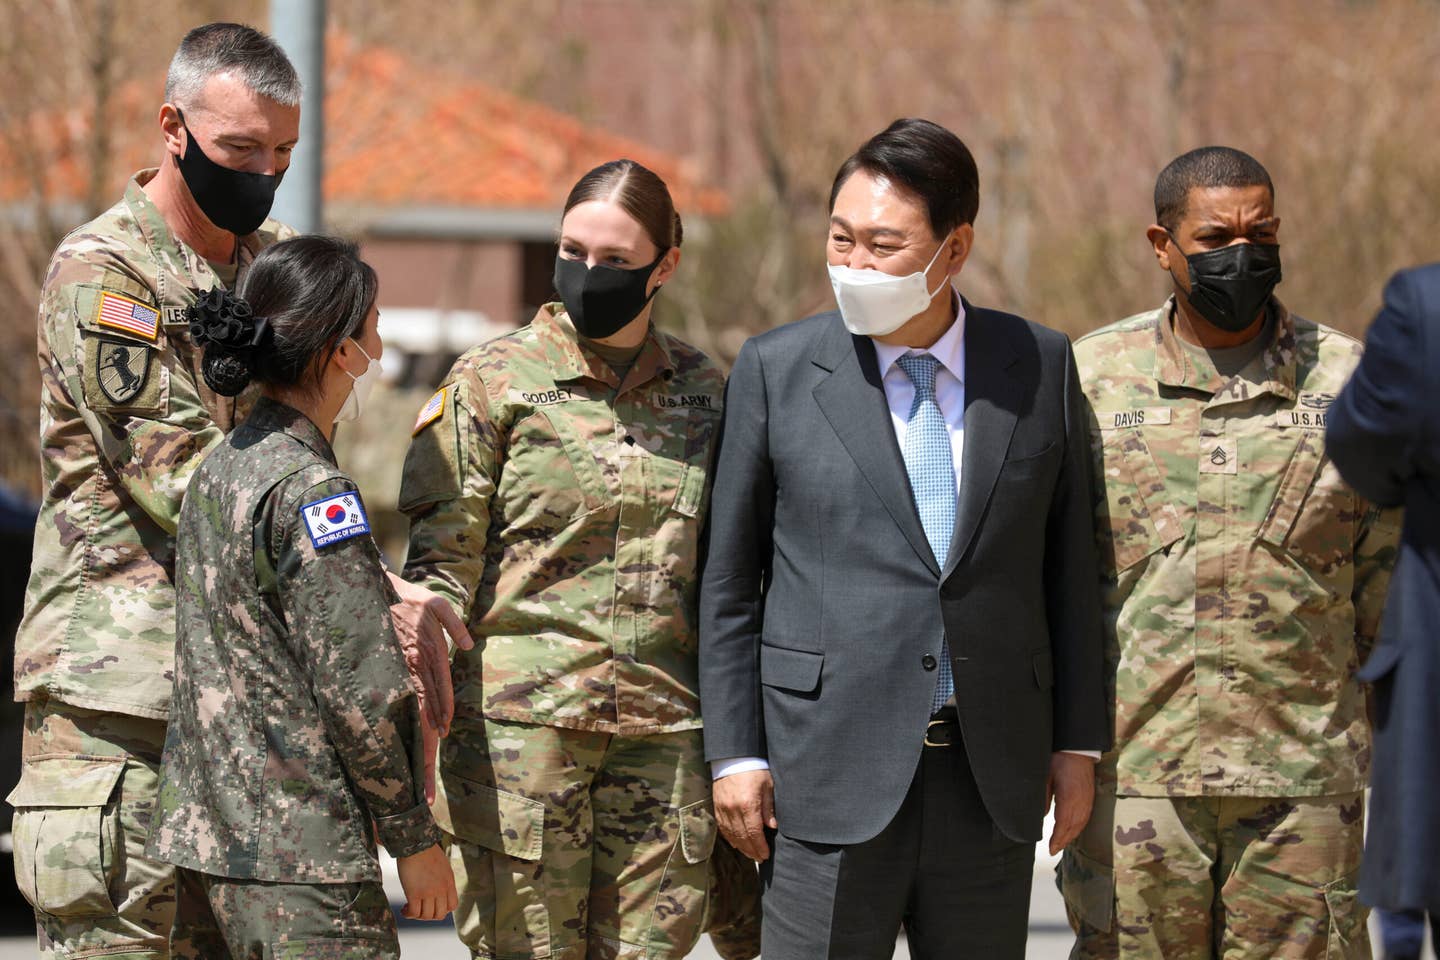 South Korean President-elect Yoon Suk Yeoltalks with soldiers from the 2nd Infantry Division, South Korea/U.S. Combined Division at Camp Humphreys on April 7, 2022. <em>Photo by Cpl. Seong Yeon Kang/U.S. Army via Getty Images</em>